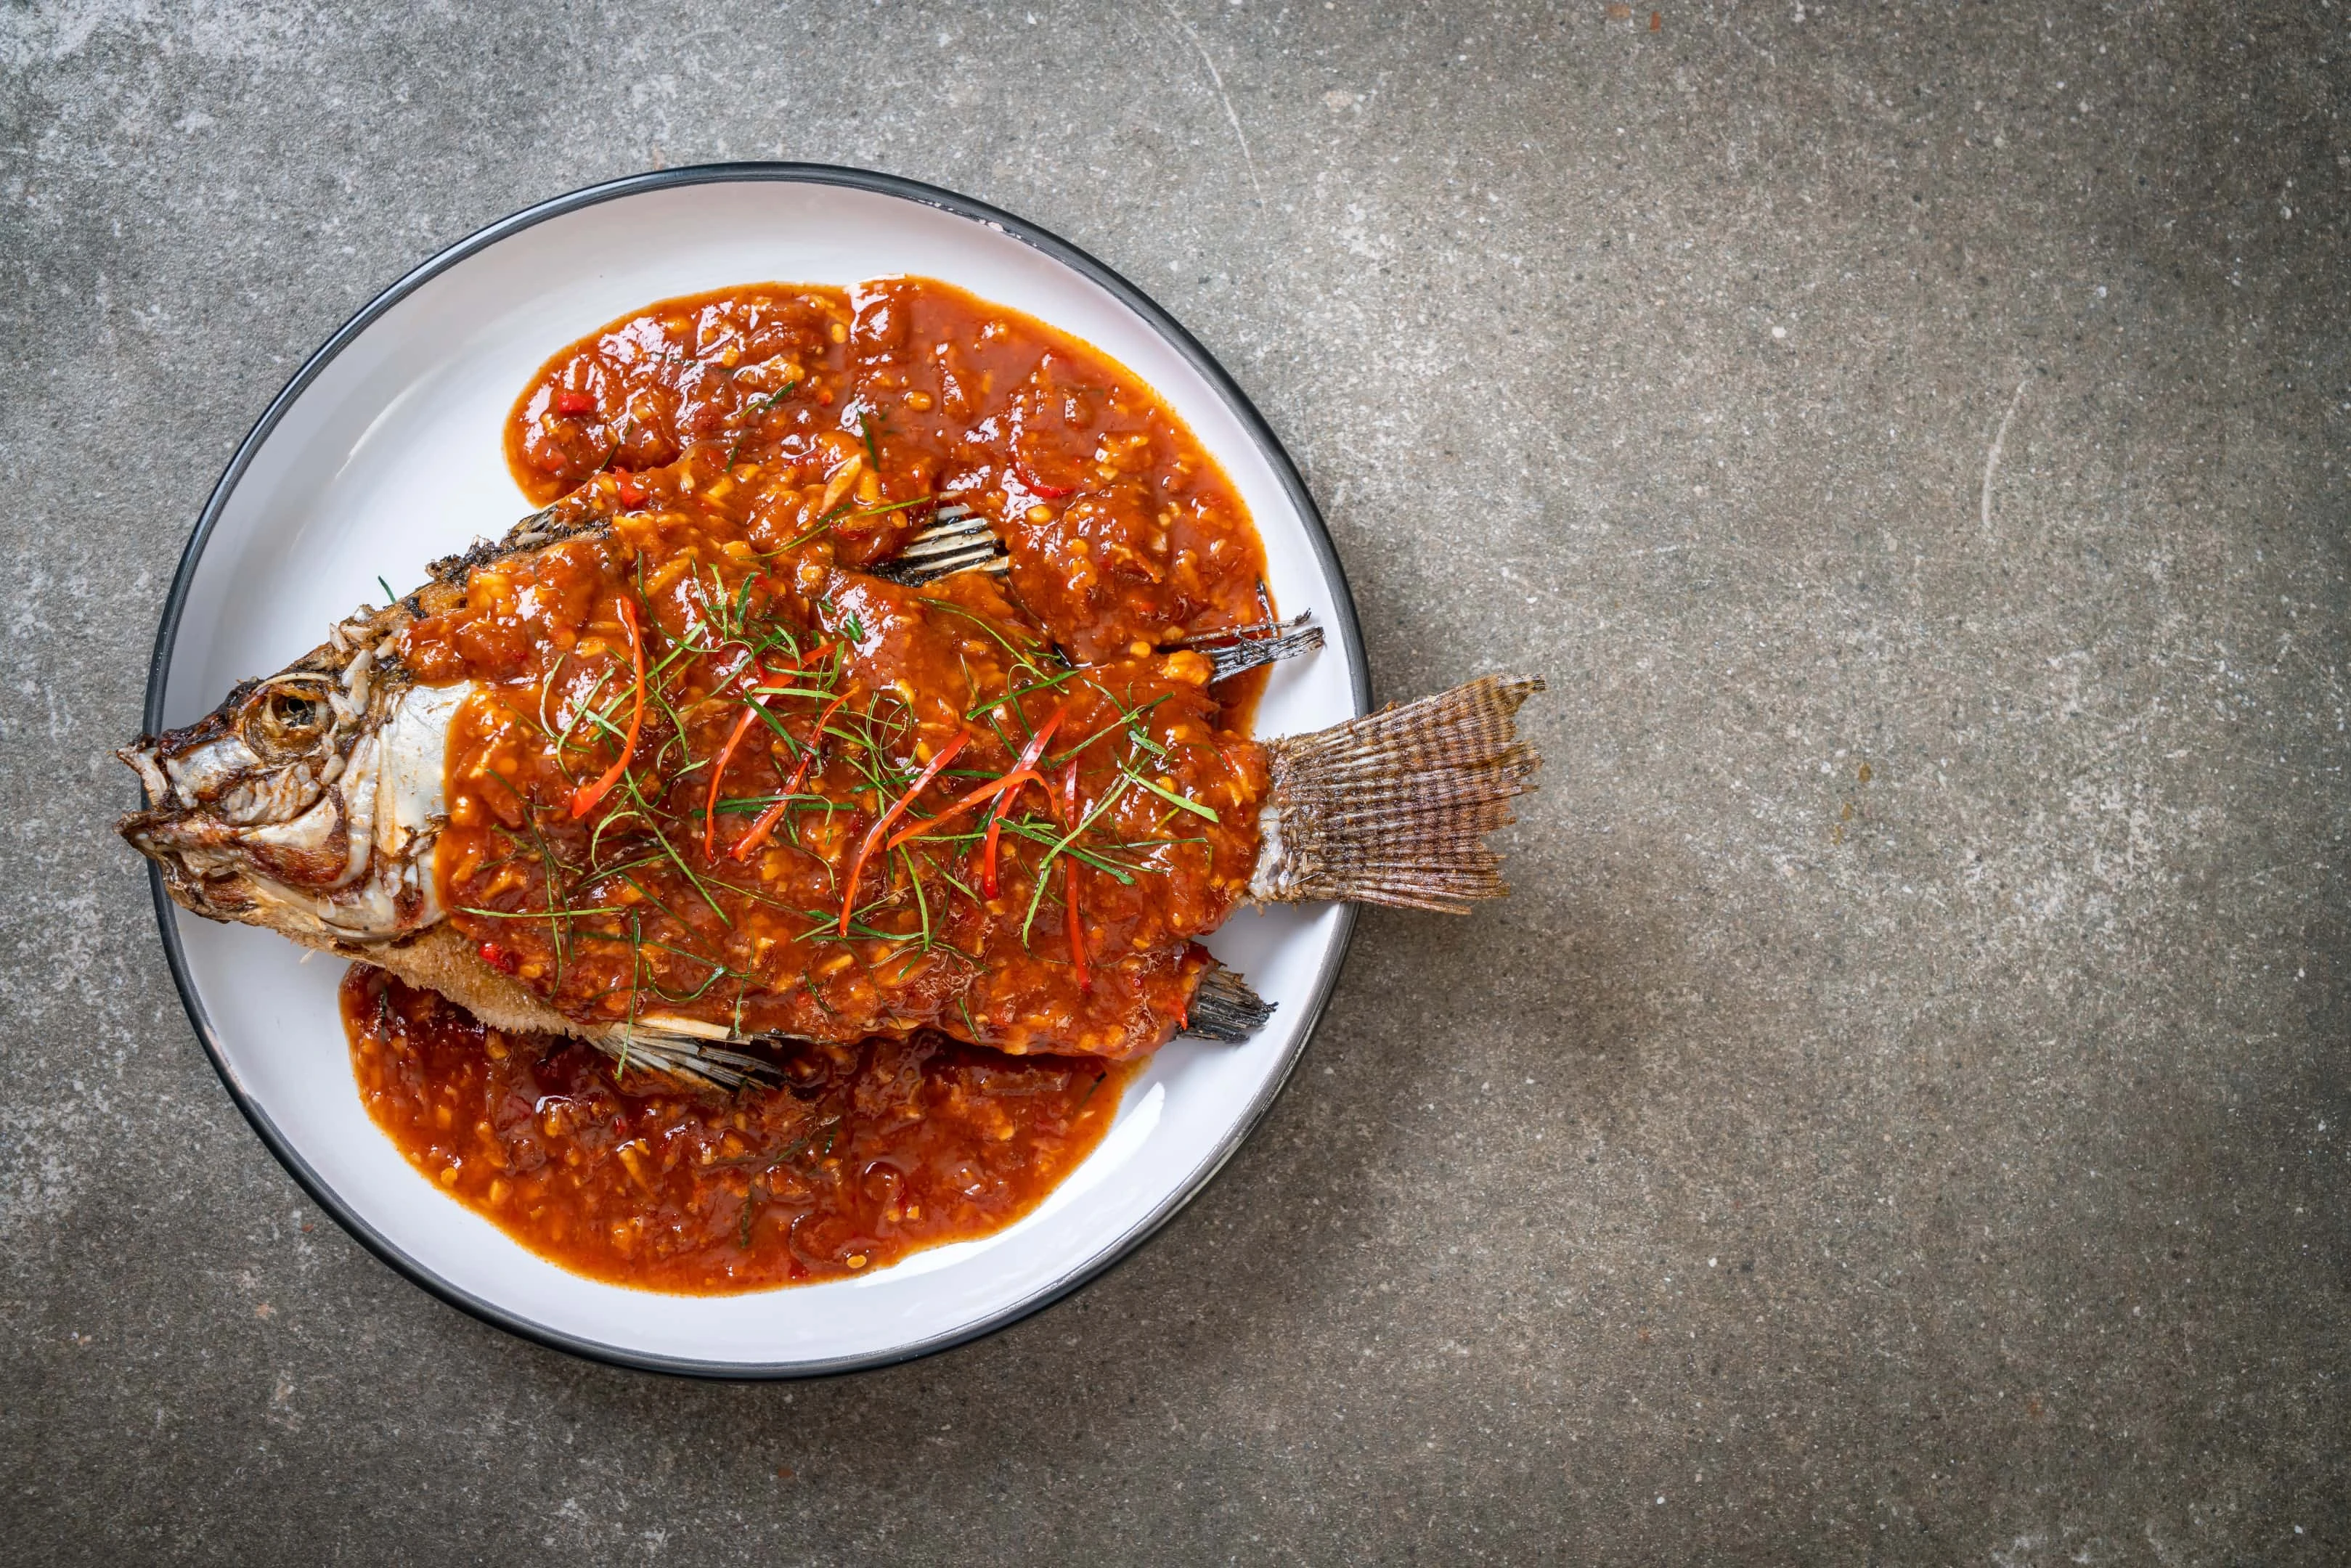 Fried fish with xo sauce  — nucleic acids food